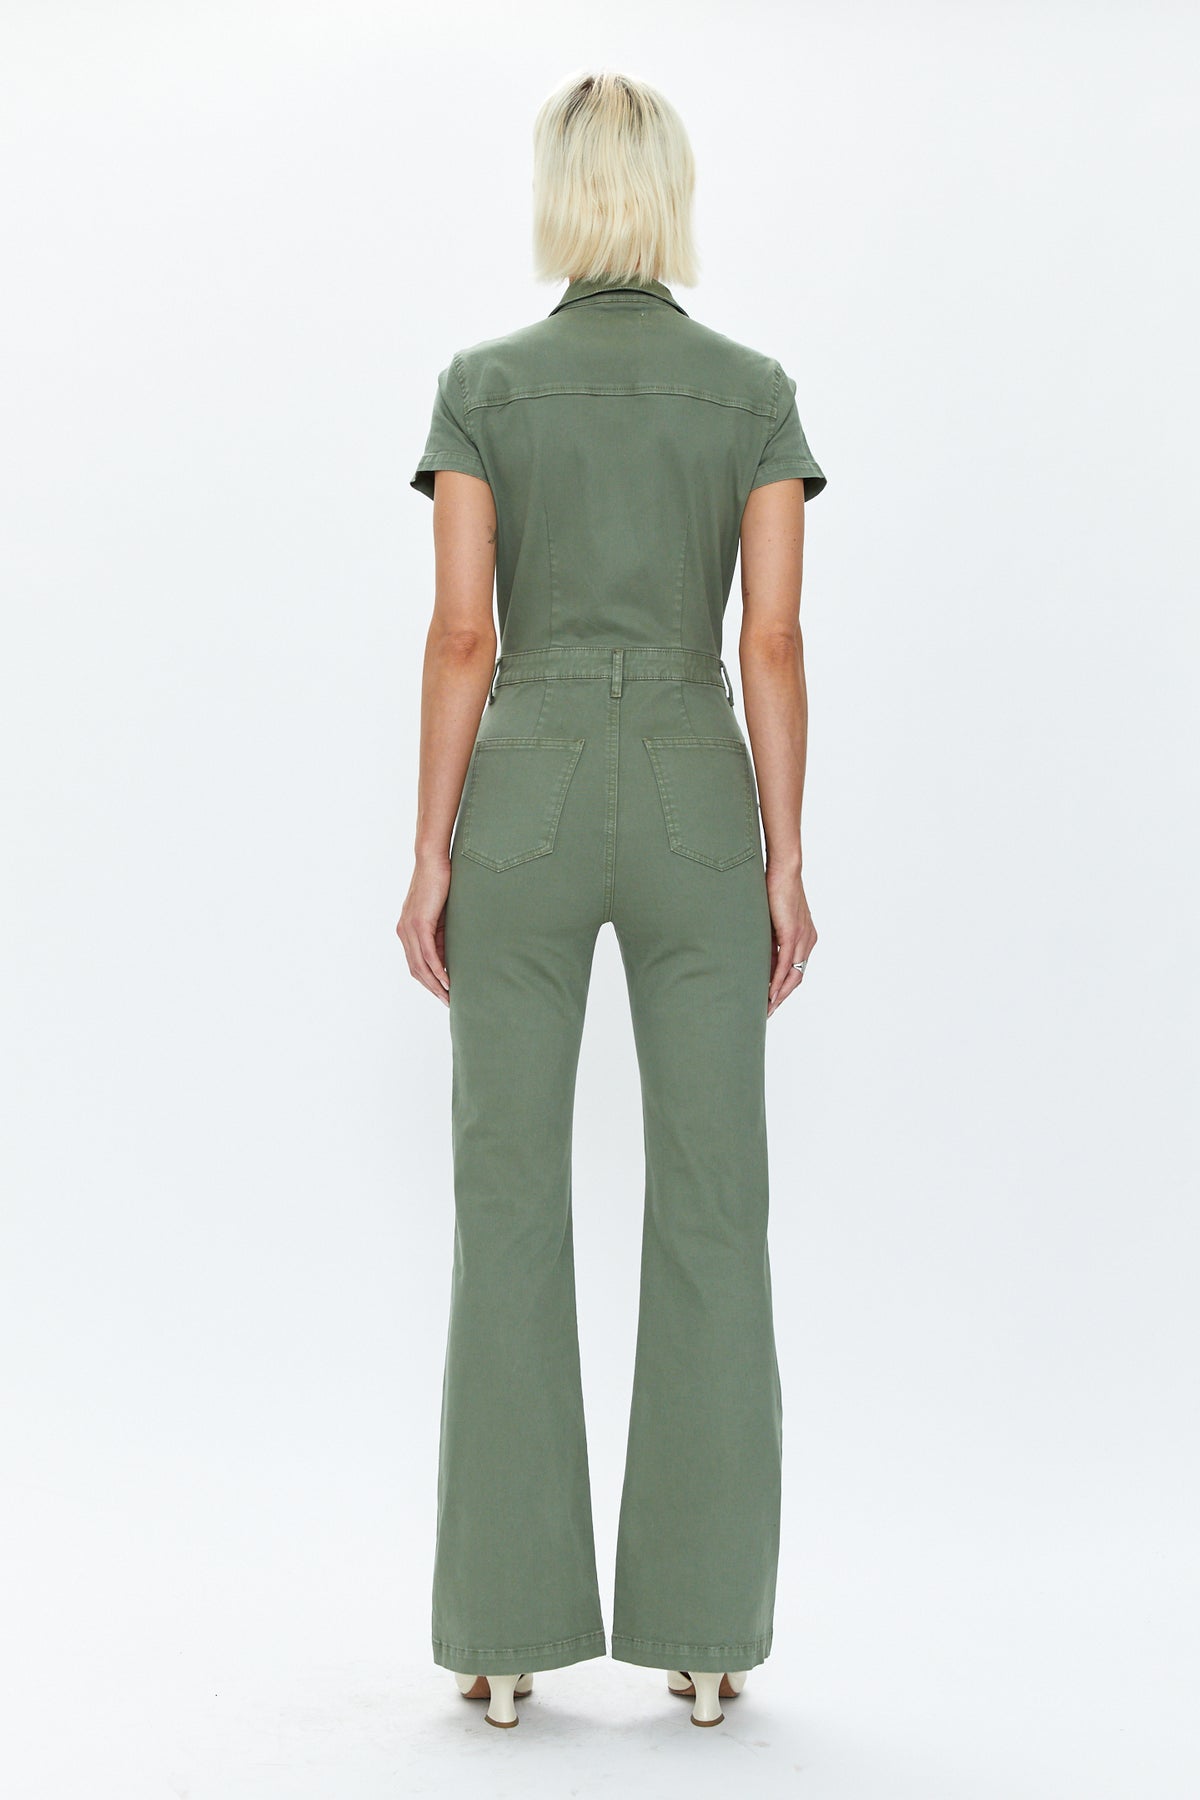 Martina Short Sleeve Flare Jumpsuit in Colonel